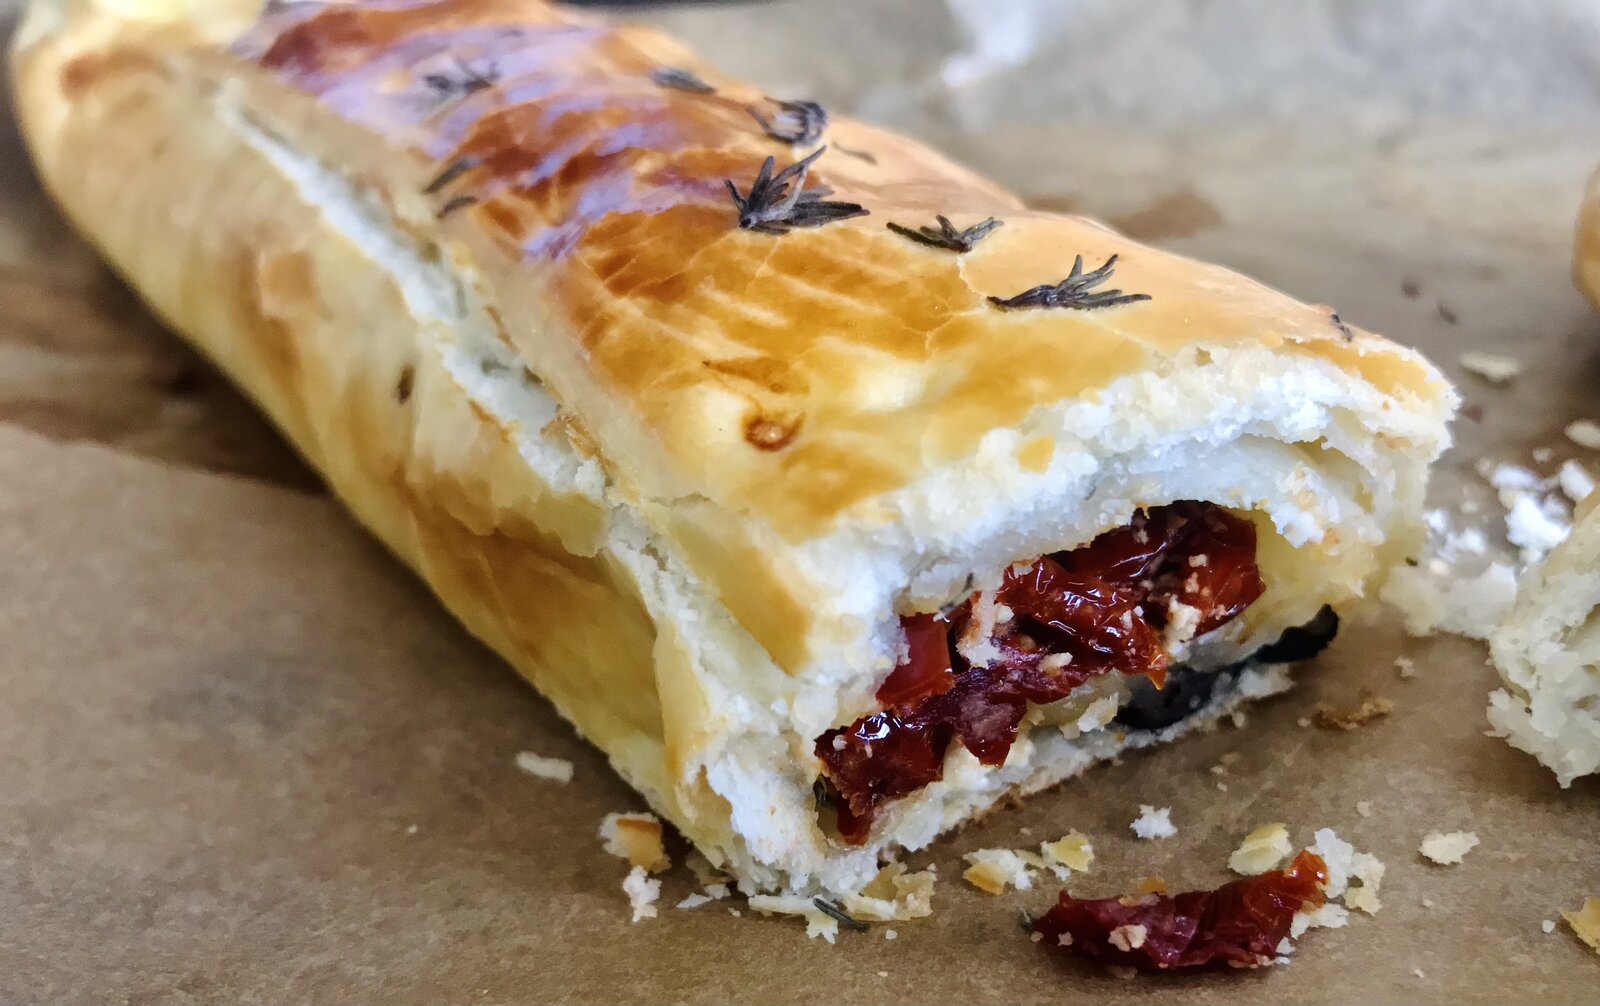 Puff Pastry Roll with Sun-Dried Toms.jpeg